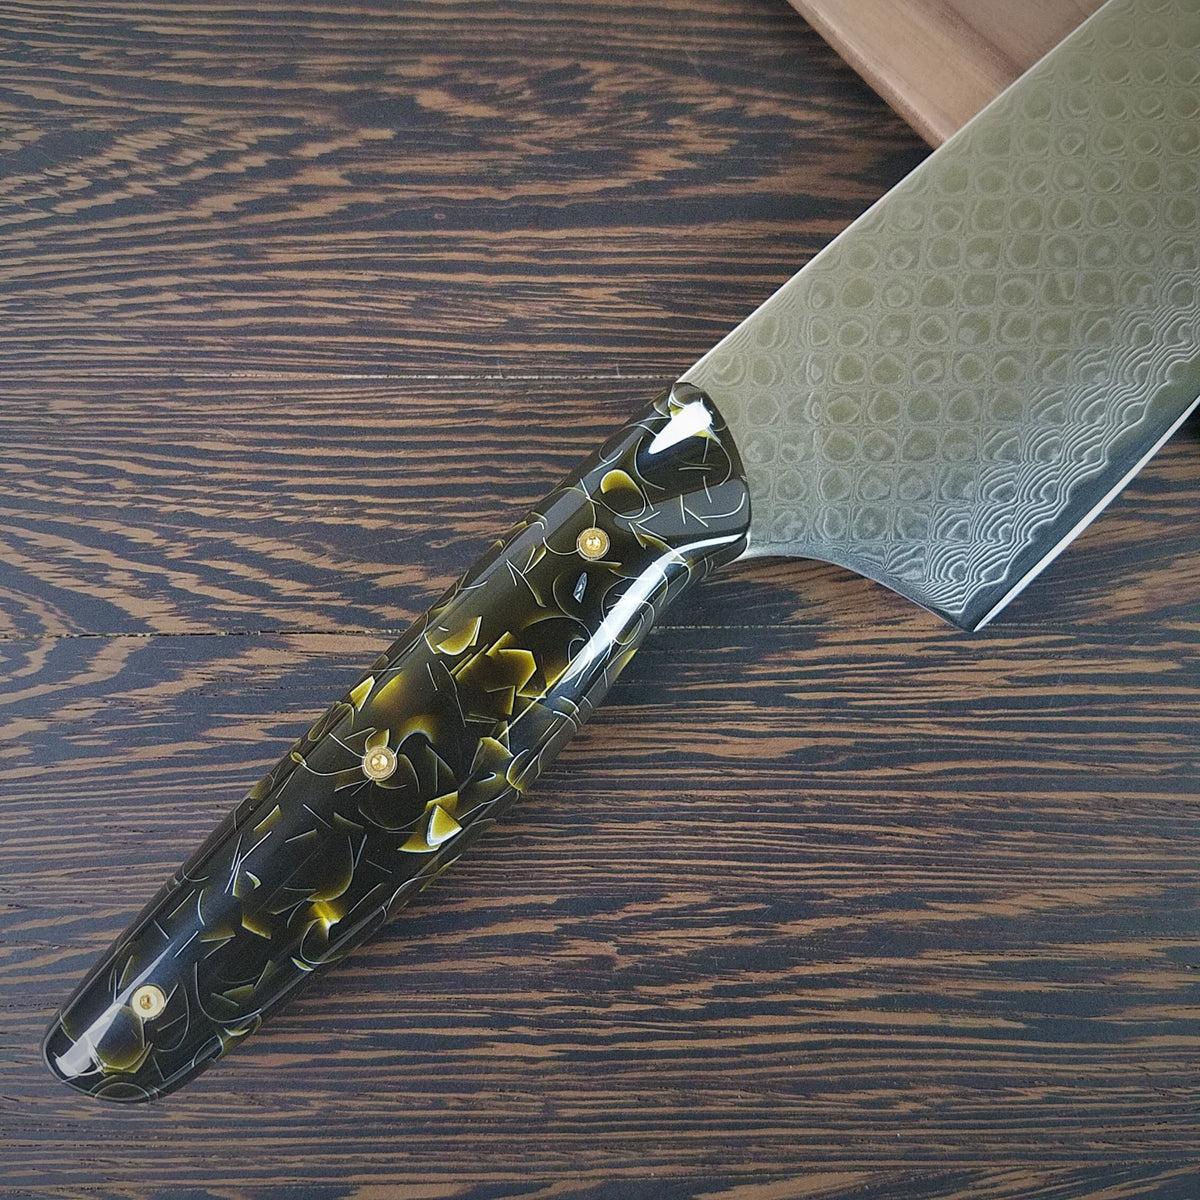 ShoxVox - 10in (254mm) Damascus Gyuto - Dragonscale - Smooth Handle